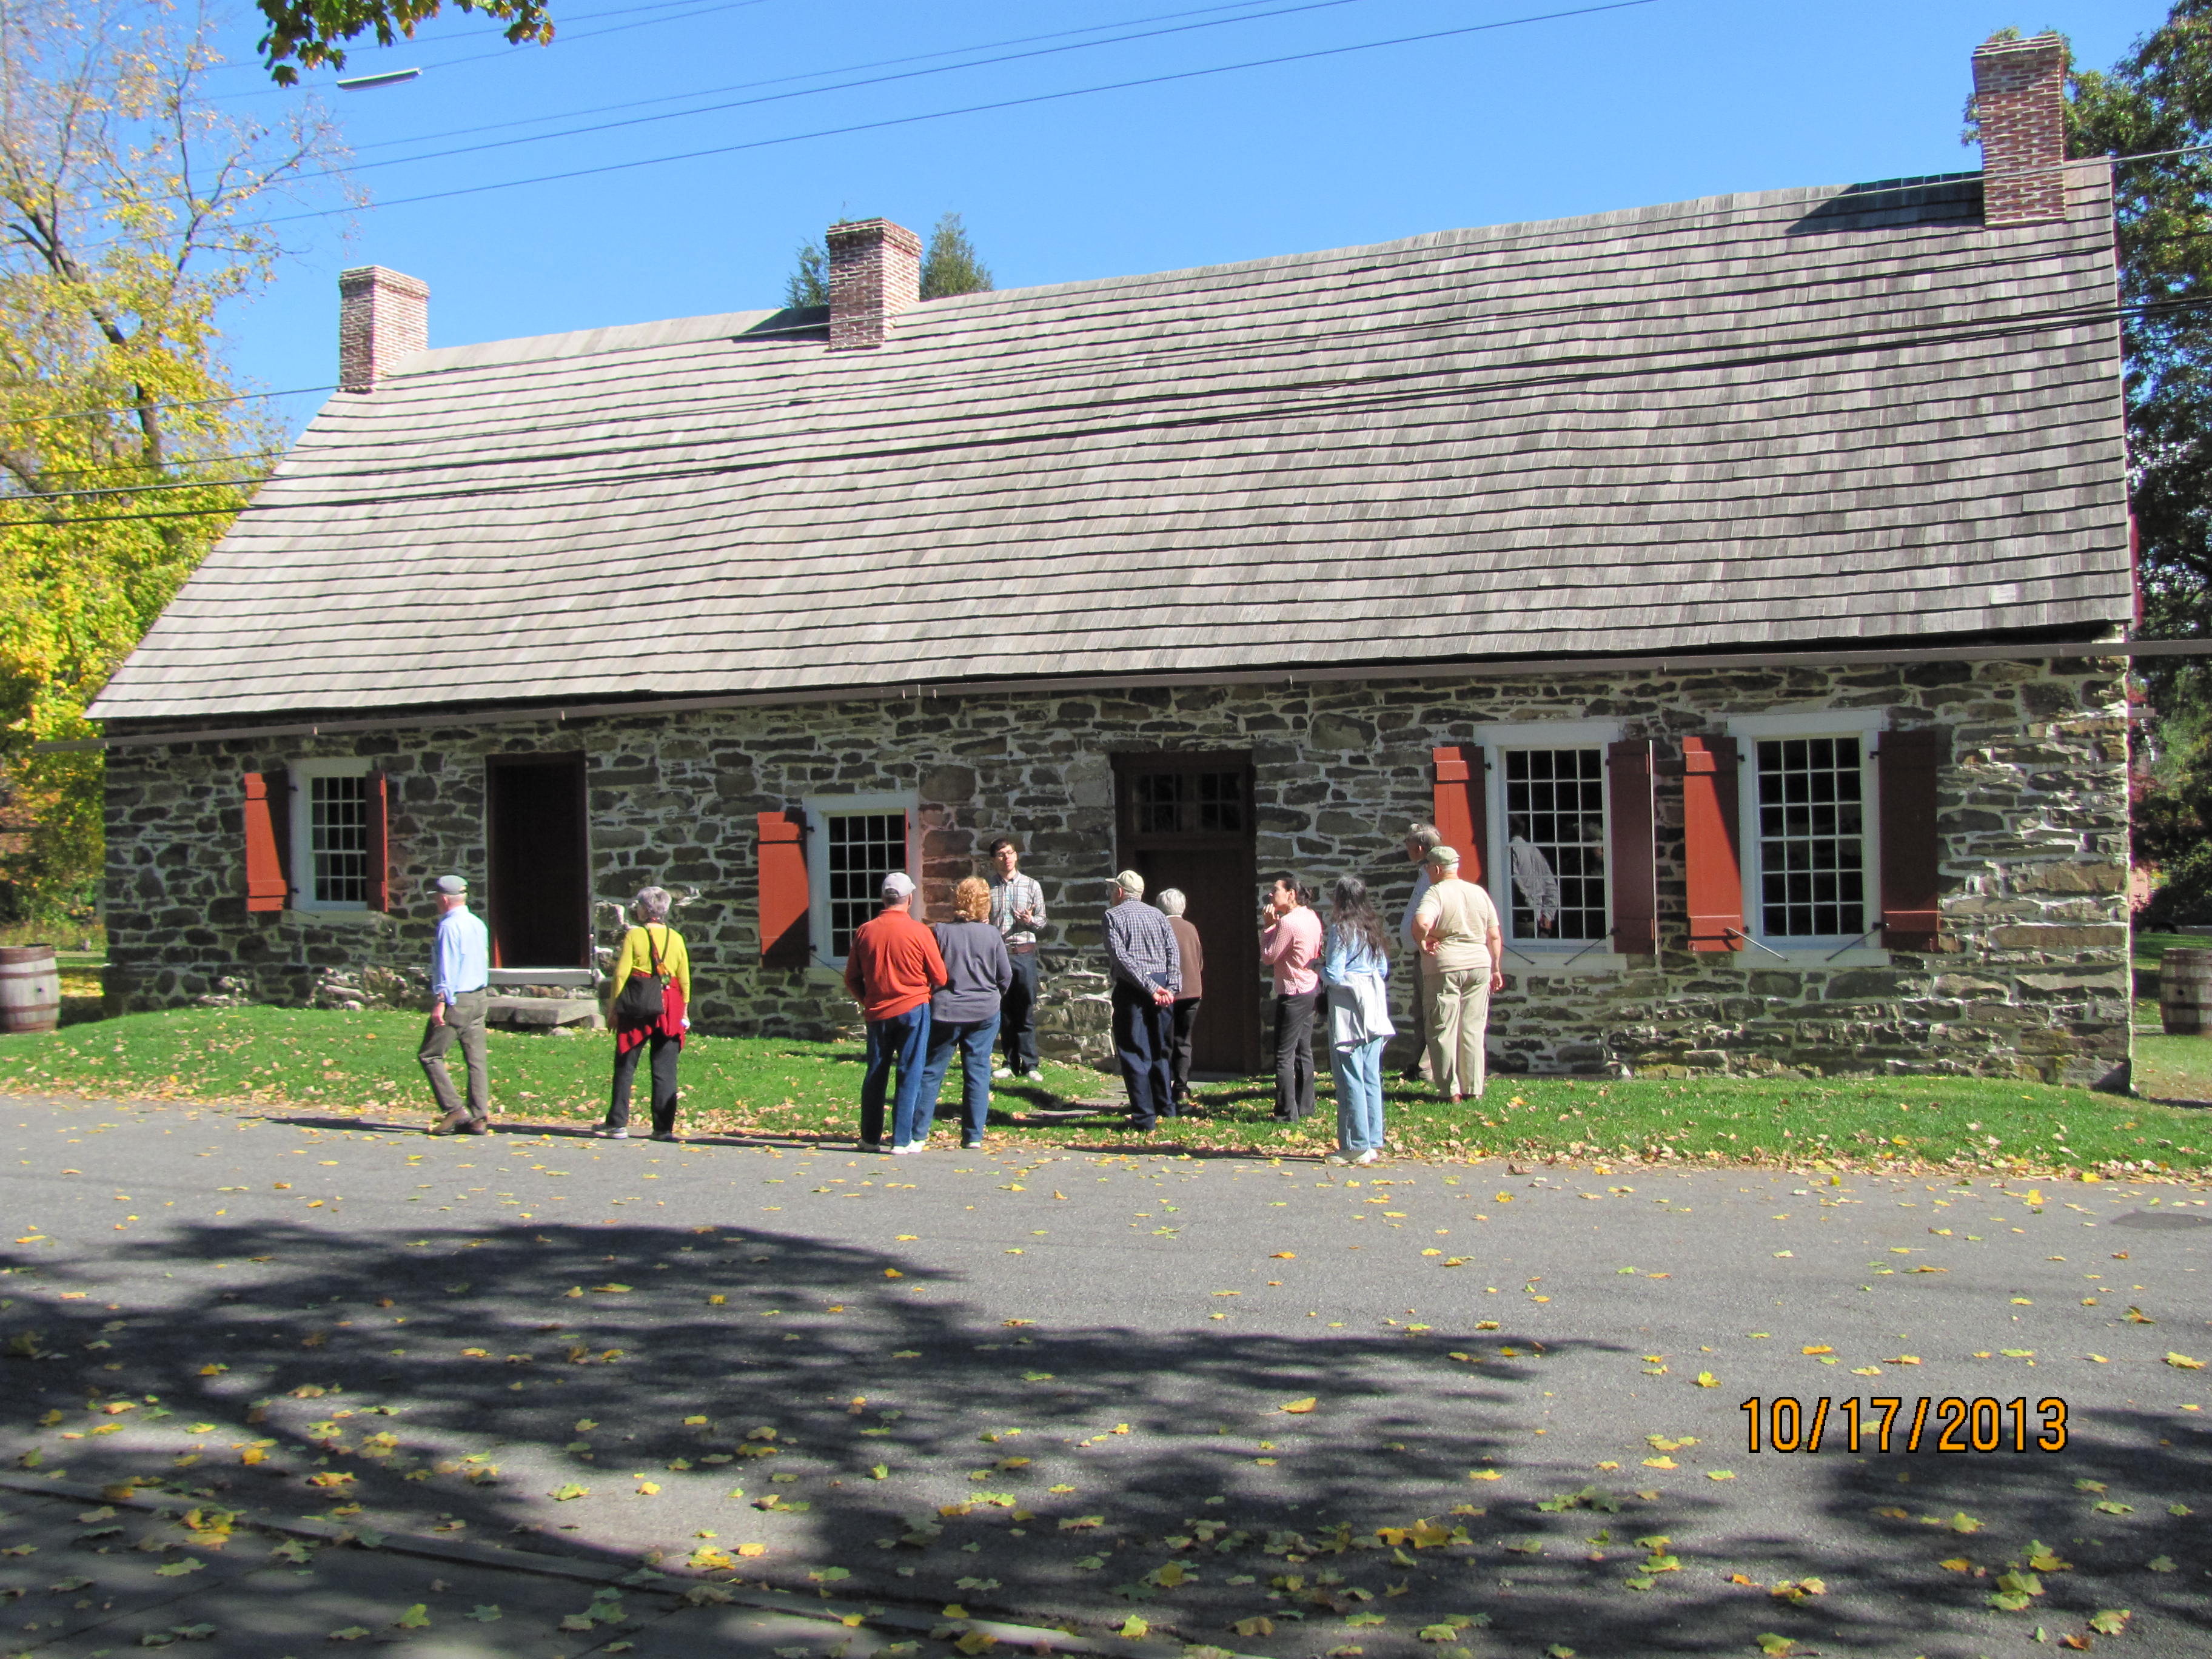 The Genealogical Society group enjoys a tour of Historic Huguenot Street